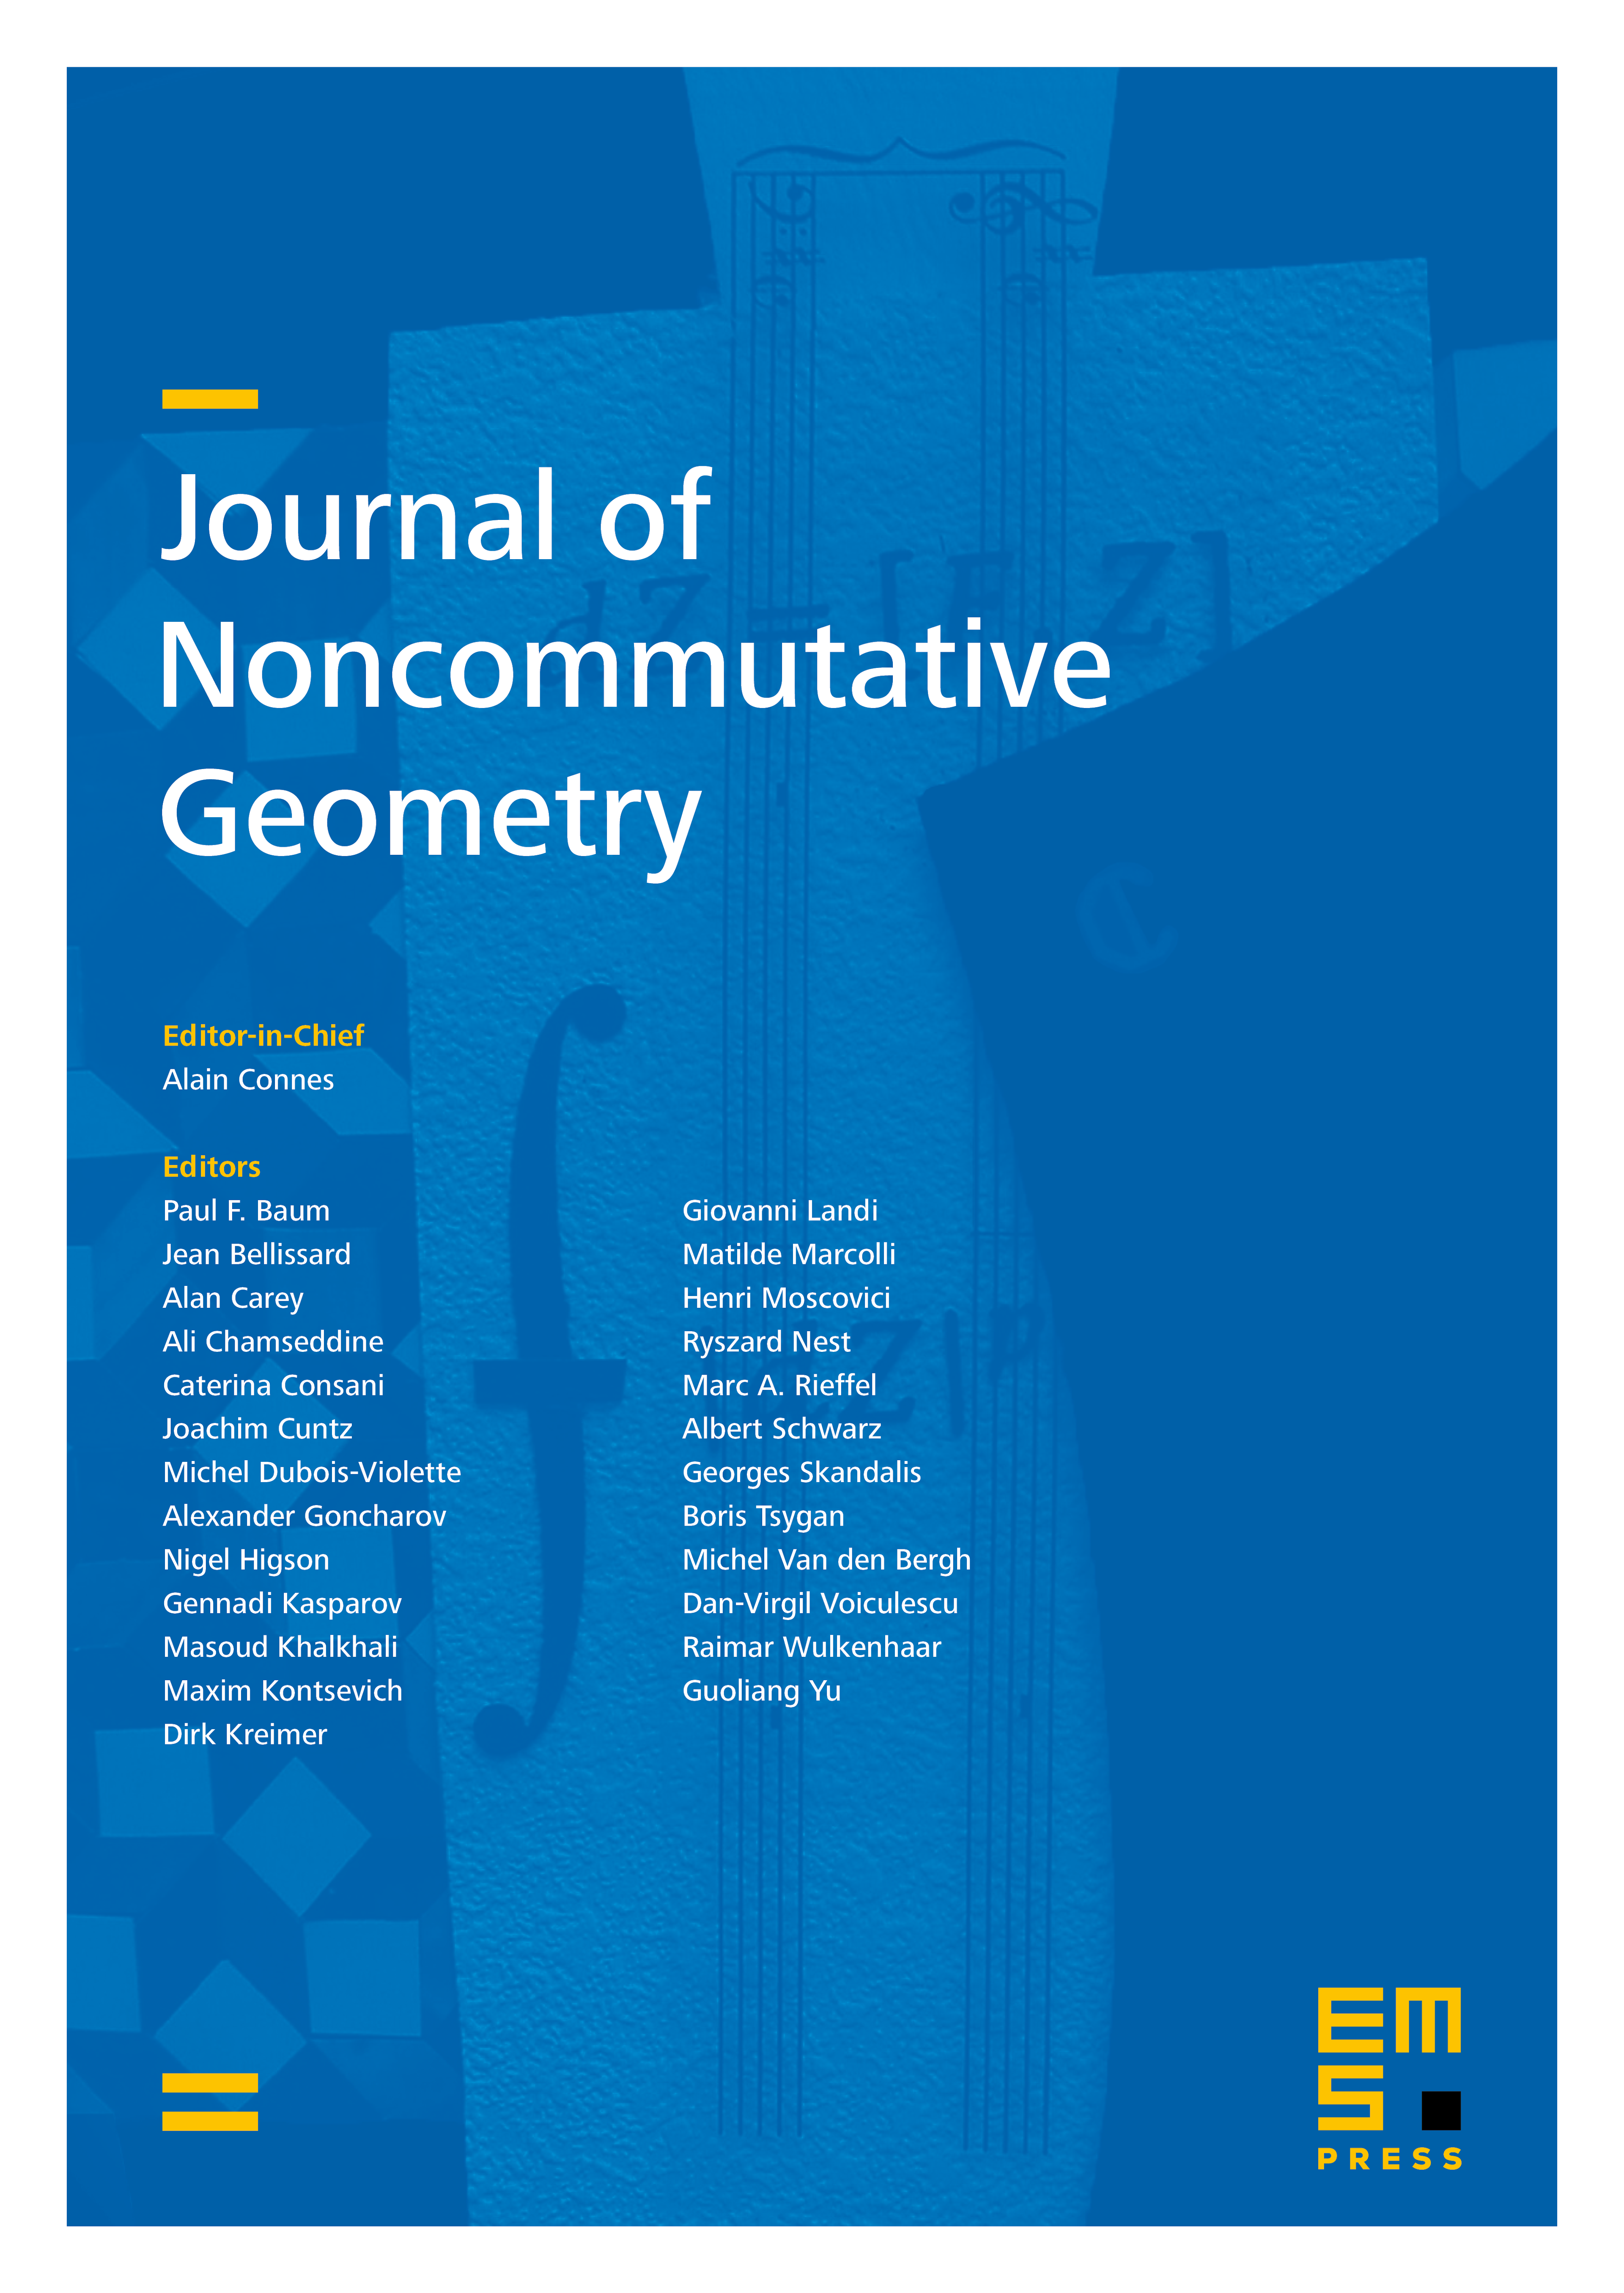 Covariant derivatives of eigenfunctions along parallel tensors over space forms and a conjecture motivated by the vertex algebraic structure cover